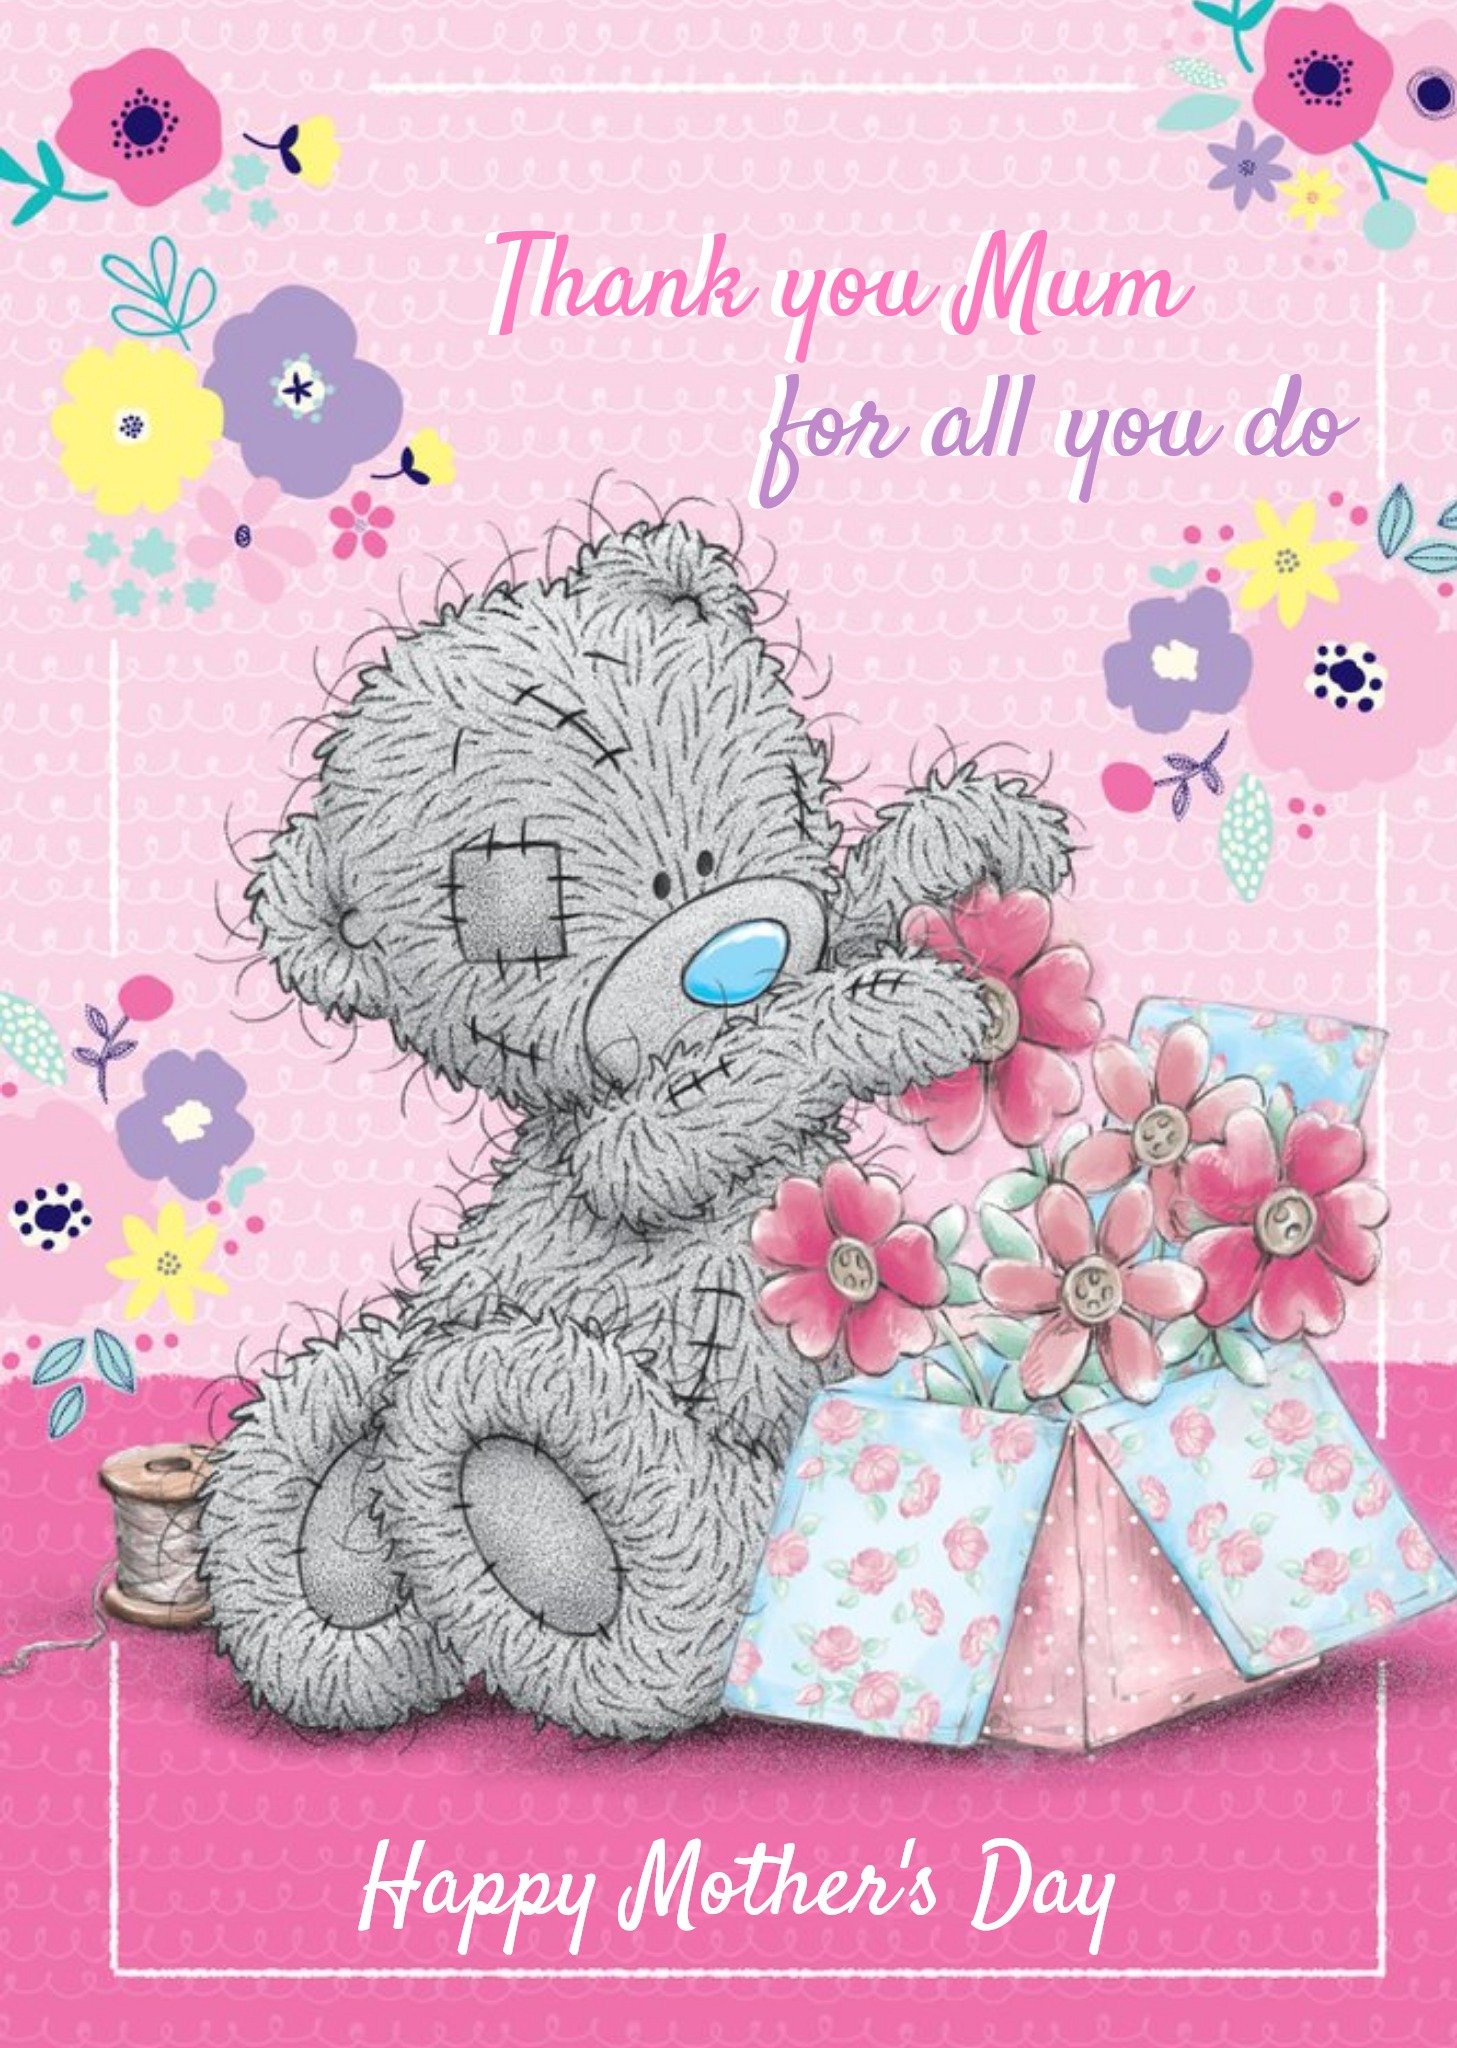 Me To You Mother's Day Card Tatty Teddy Thank You Mum For All You Do, Large